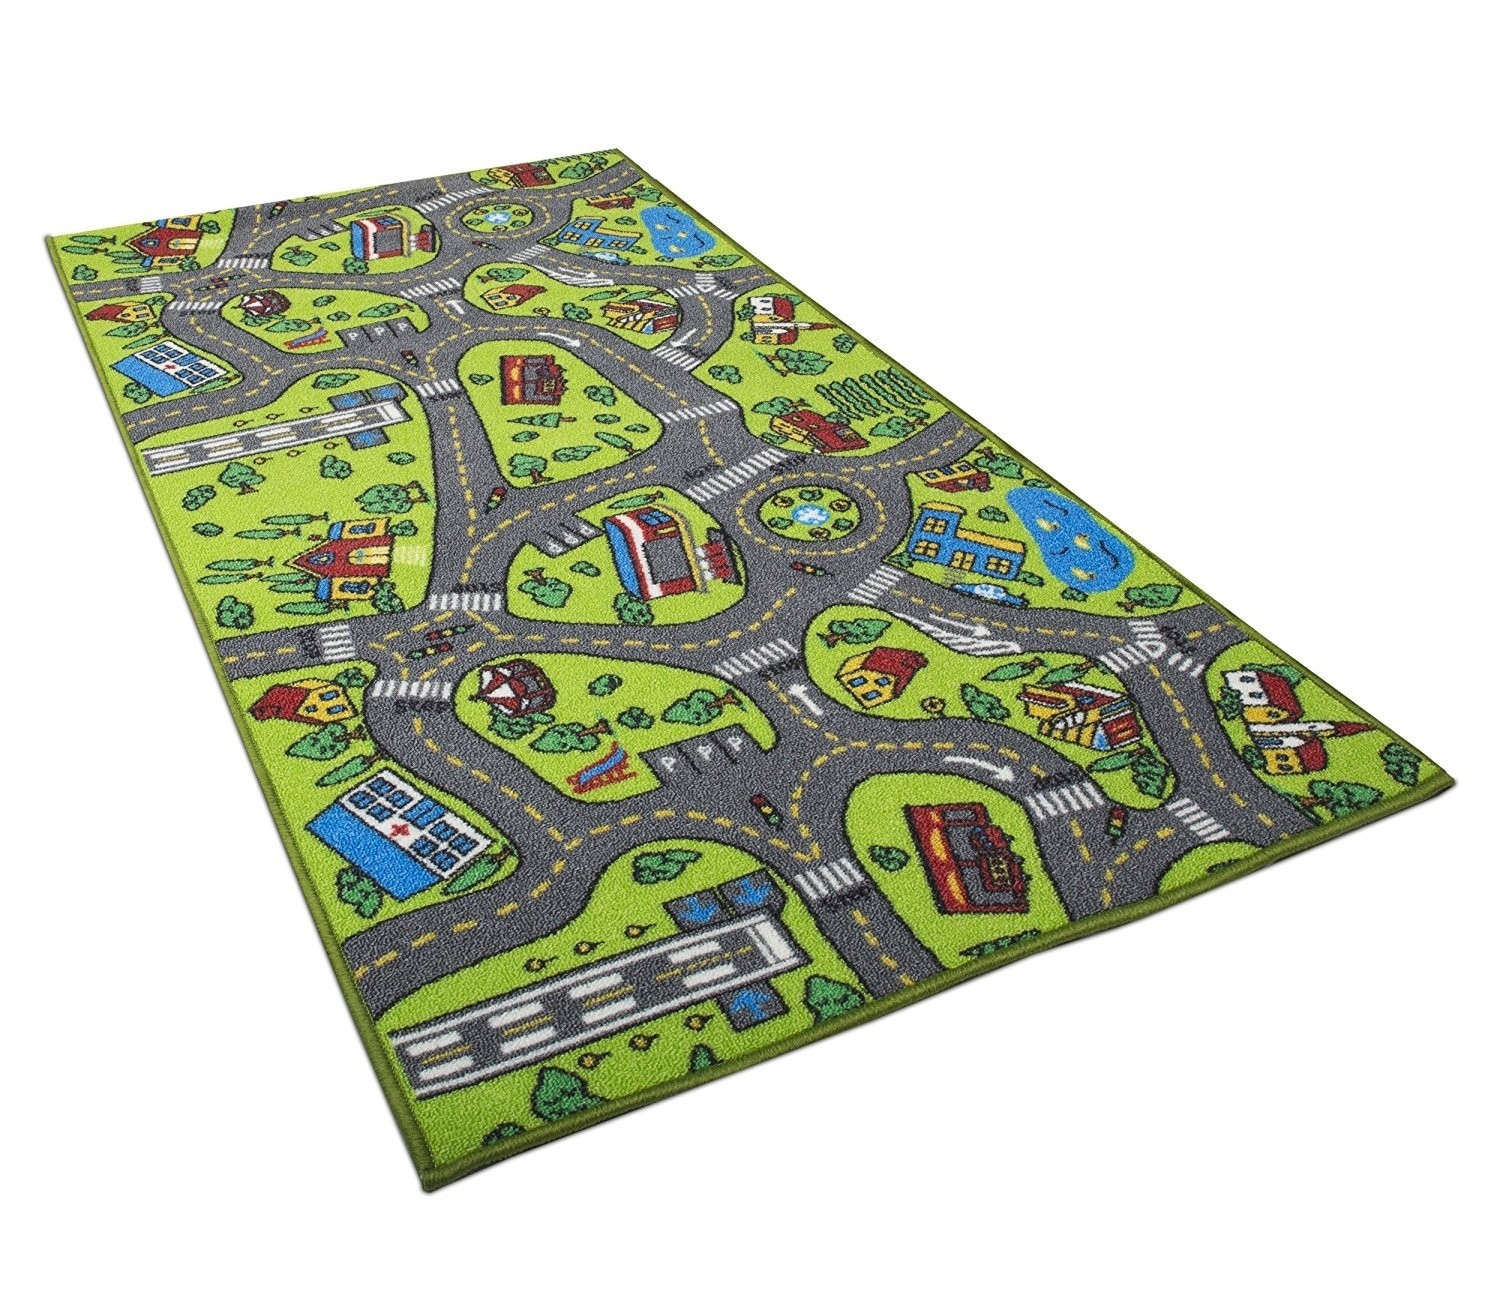 Country road design children play mat hot sell items kids